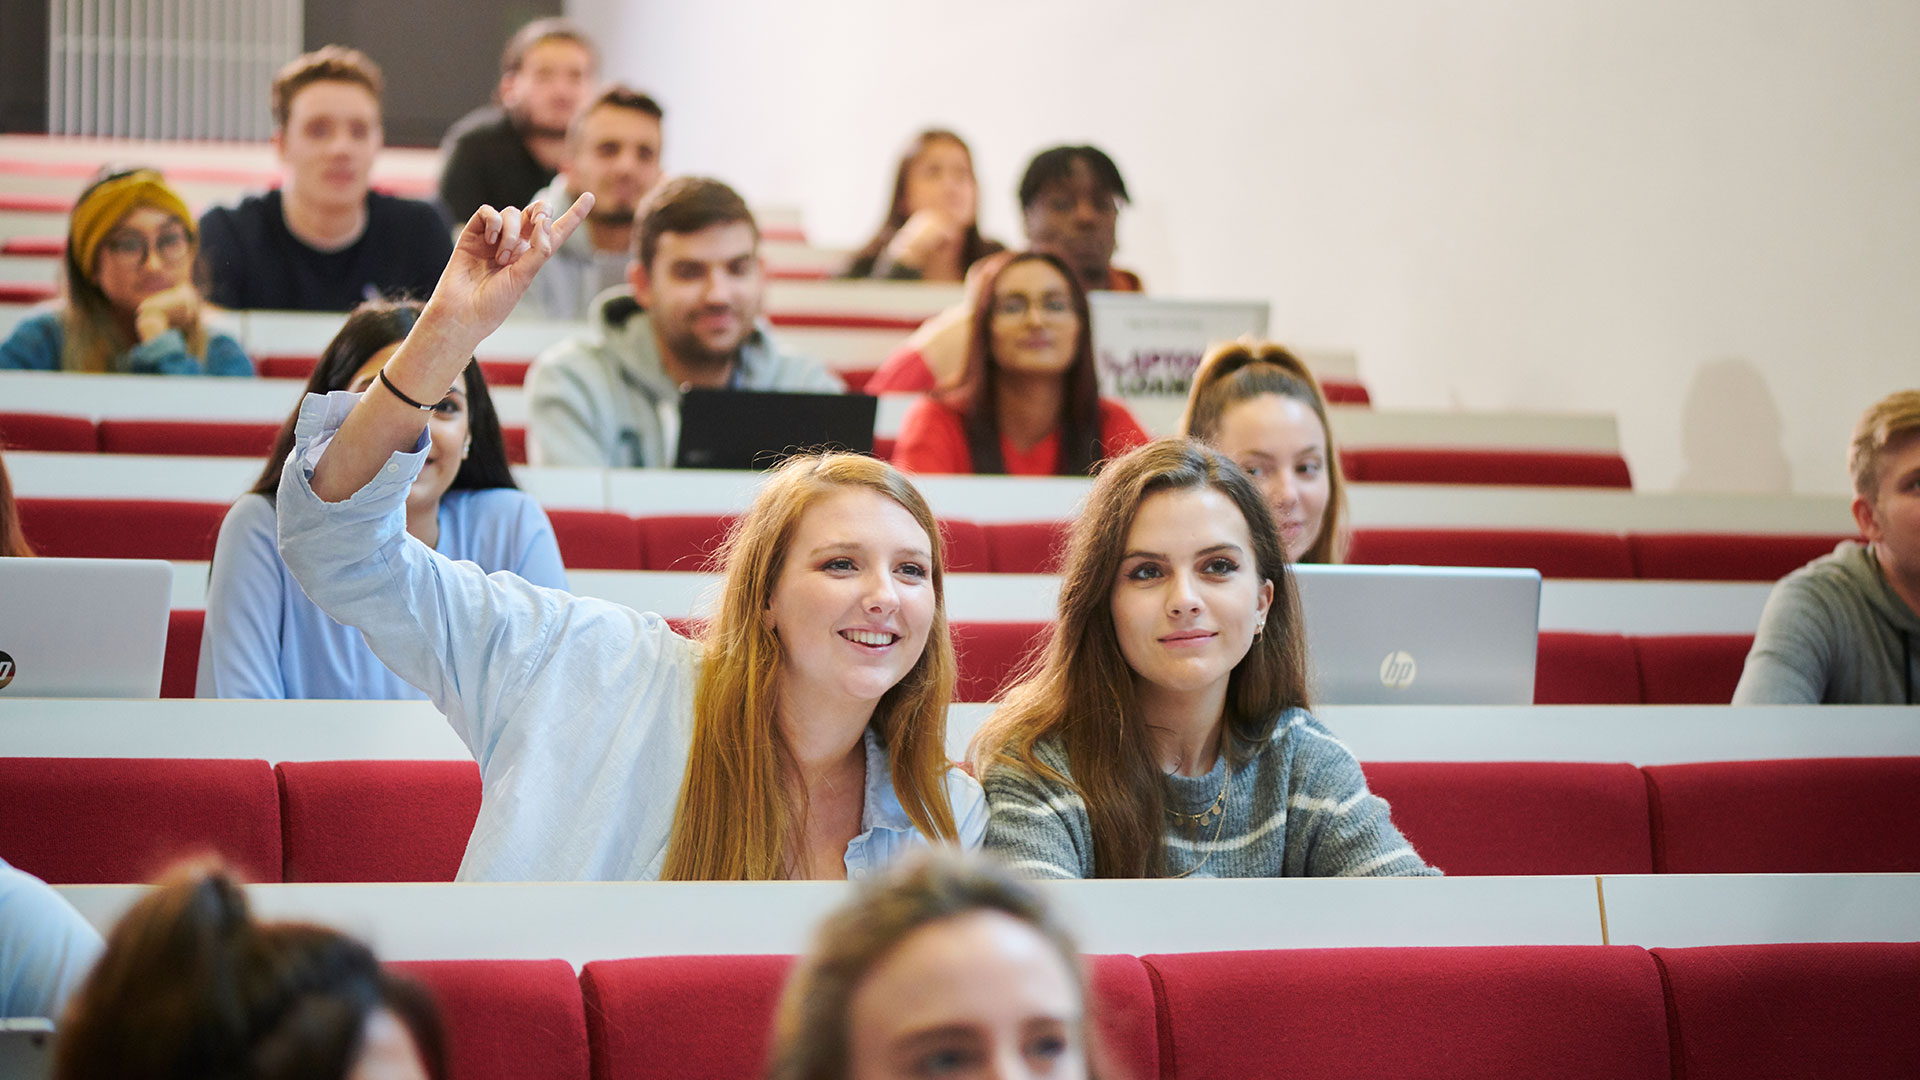 A student is sat in a lecture theatre with their hand up to ask a question during the lecture.